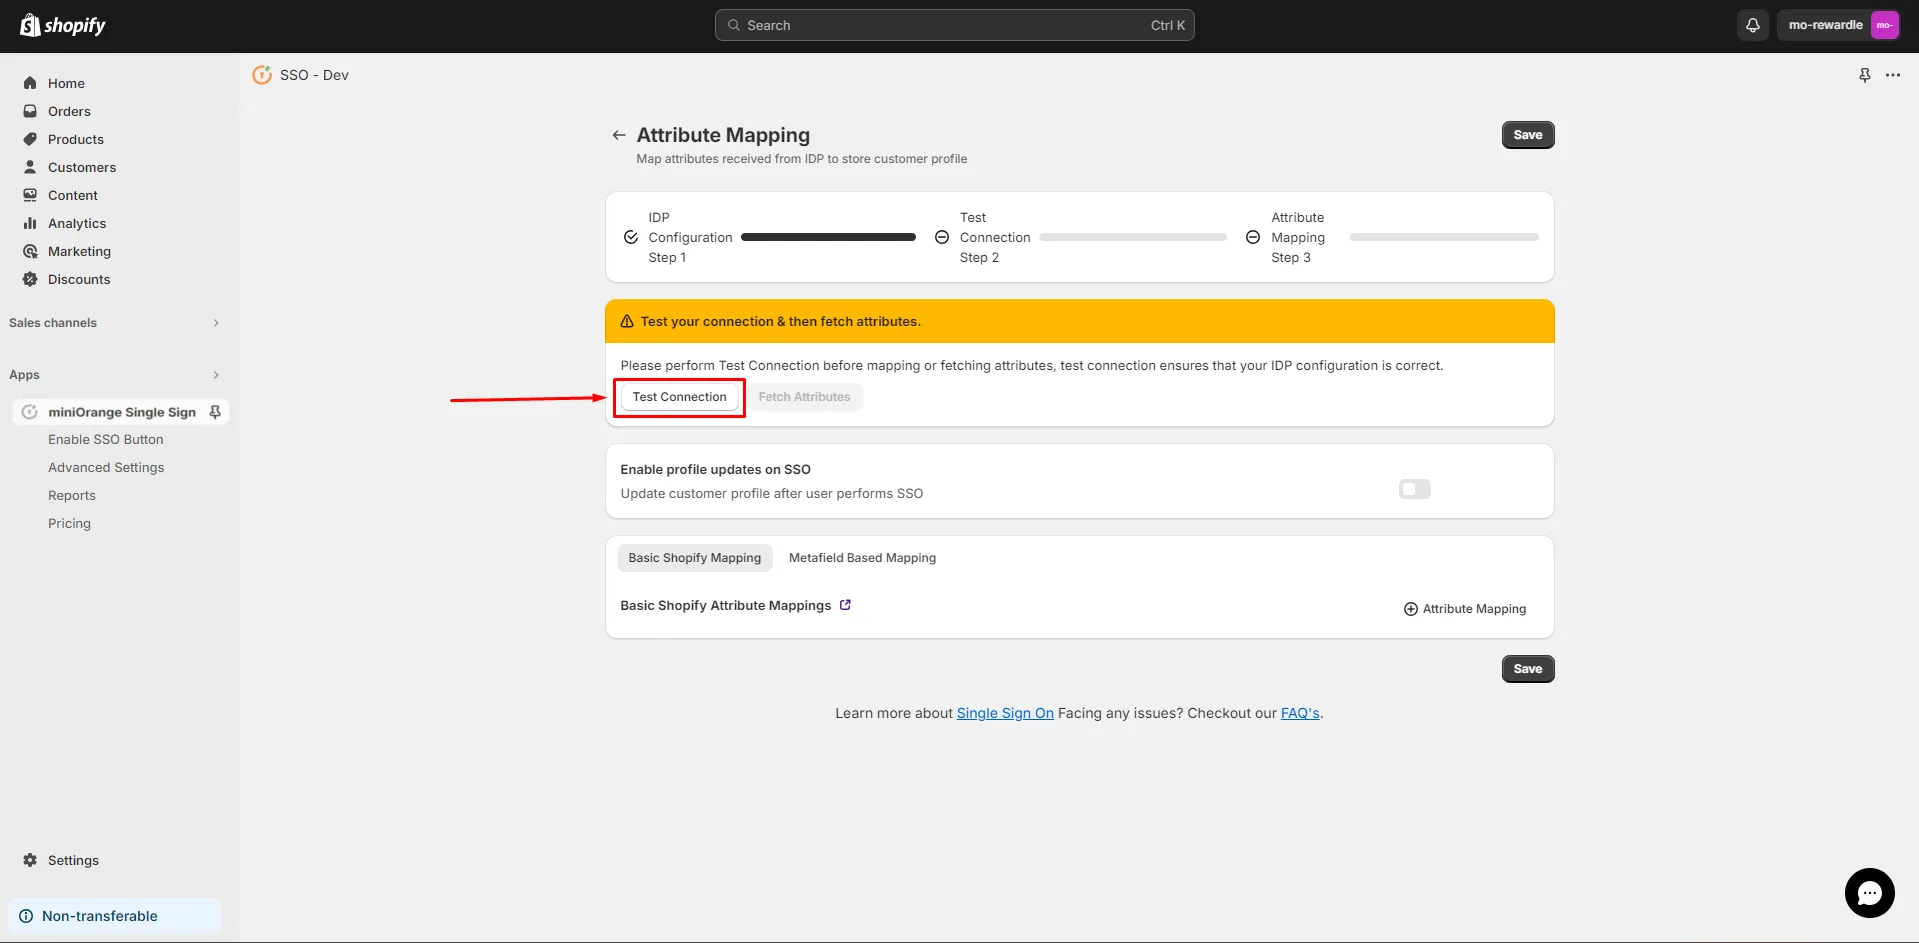 Azure AD B2C Shopify (SSO) - test Connection